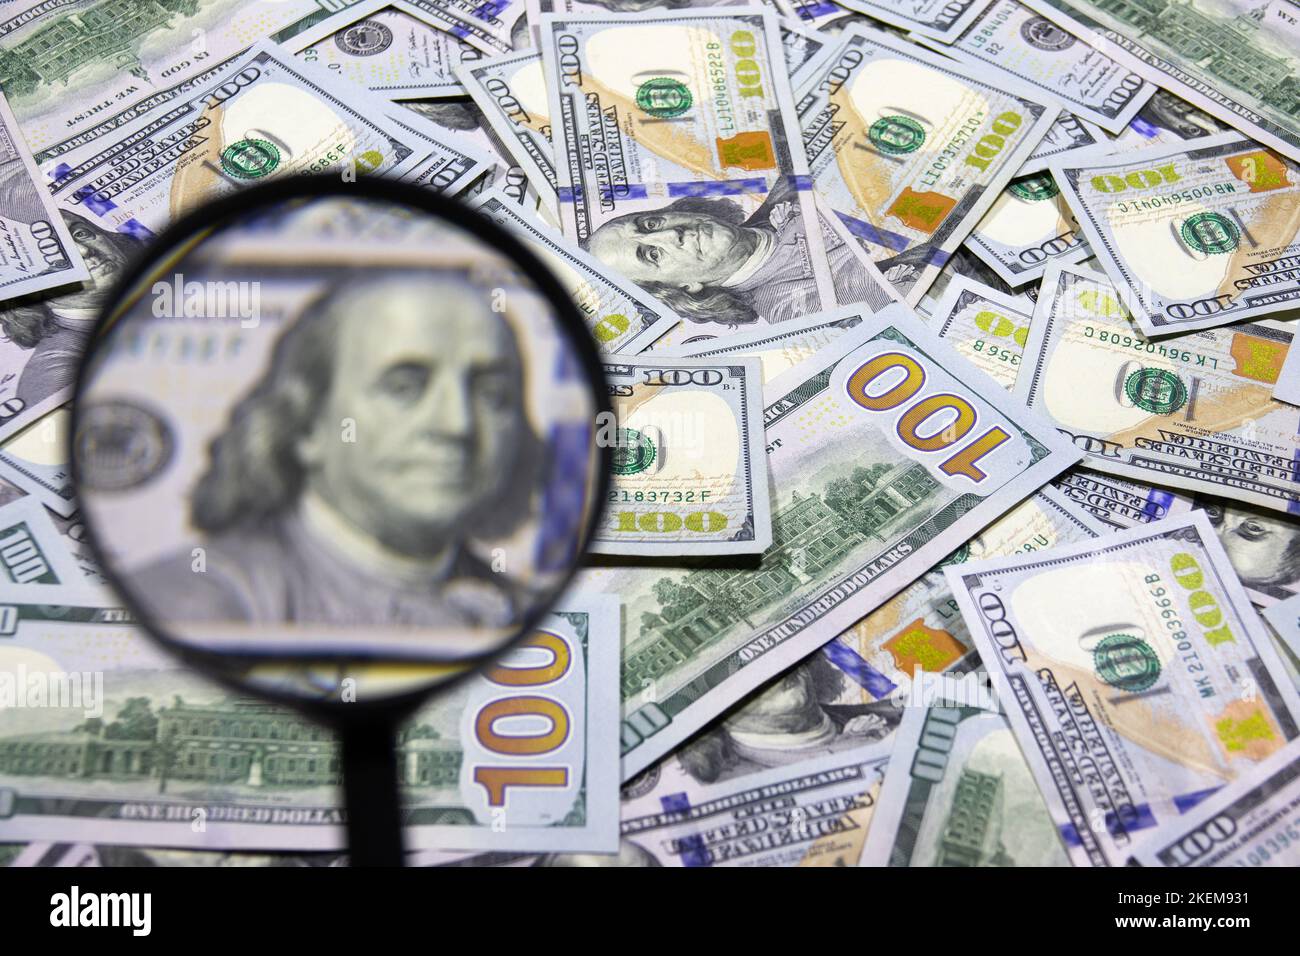 One hundred dollar banknote under magnifying glass. USA national currency. Banking and financial concept. Blurred background Stock Photo